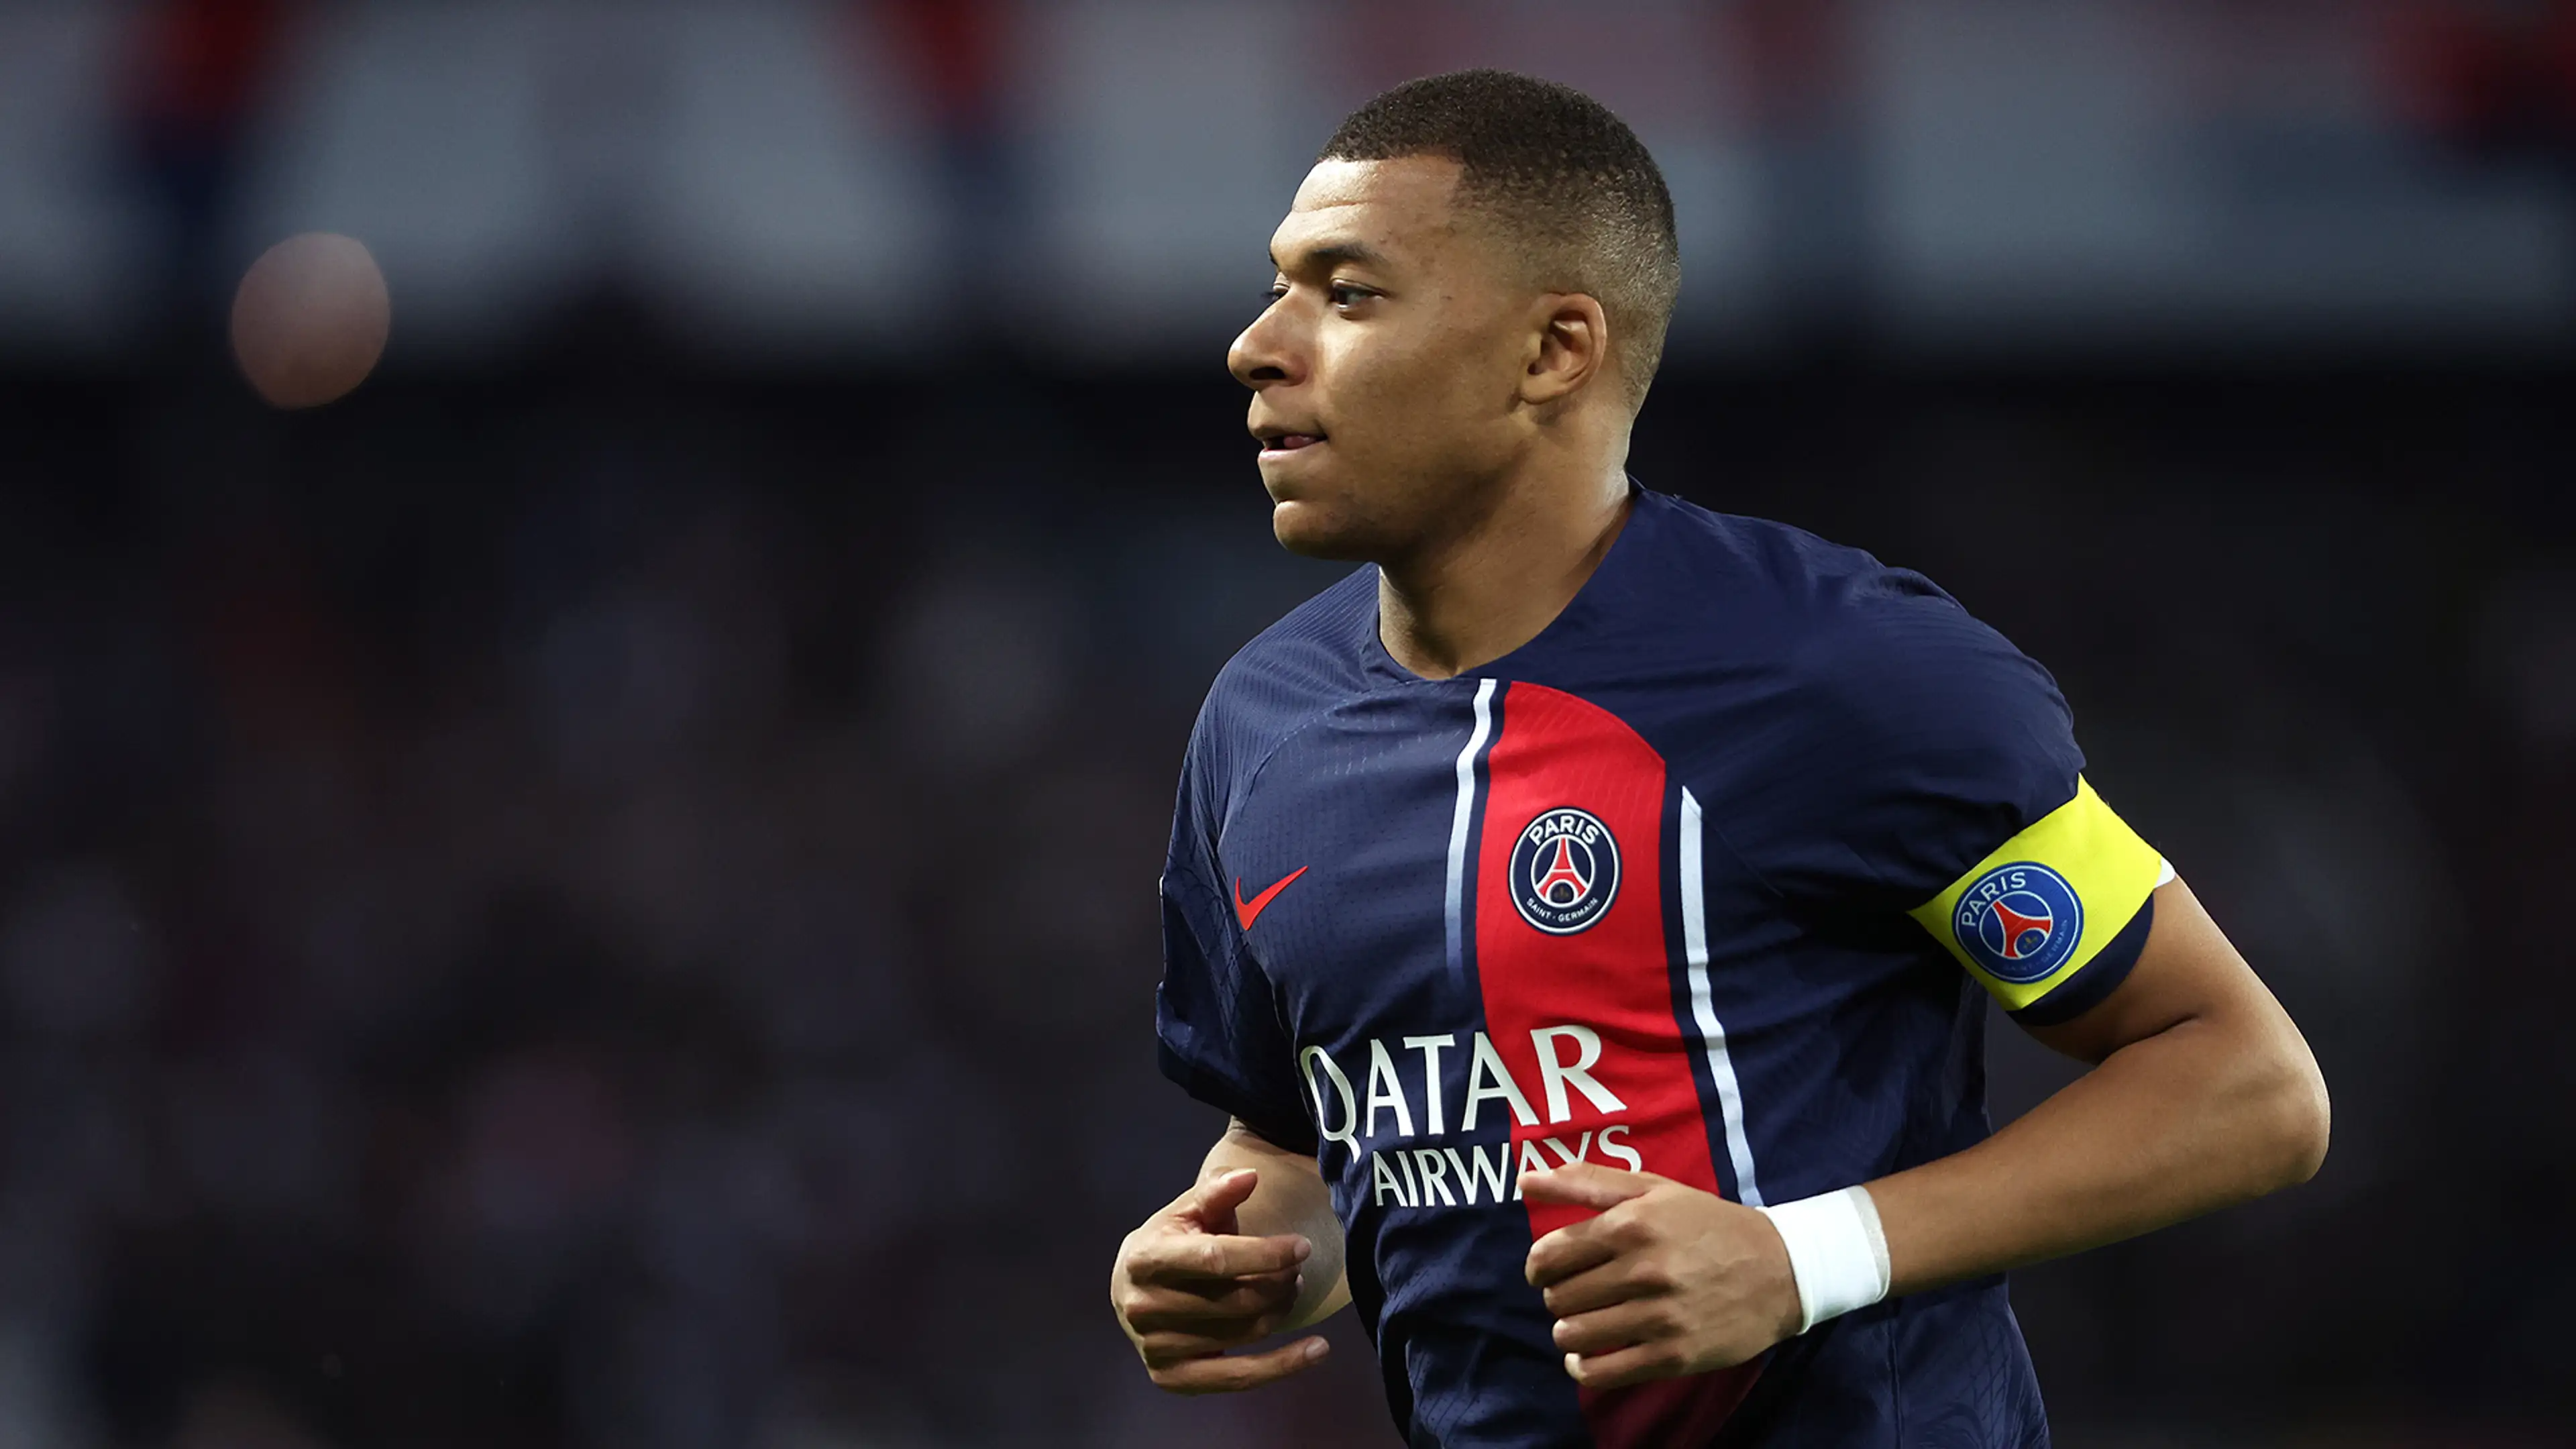 Le Parisien: Mbappé Notifies PSG Of Intention To Stay At The Club Until Contract Ends